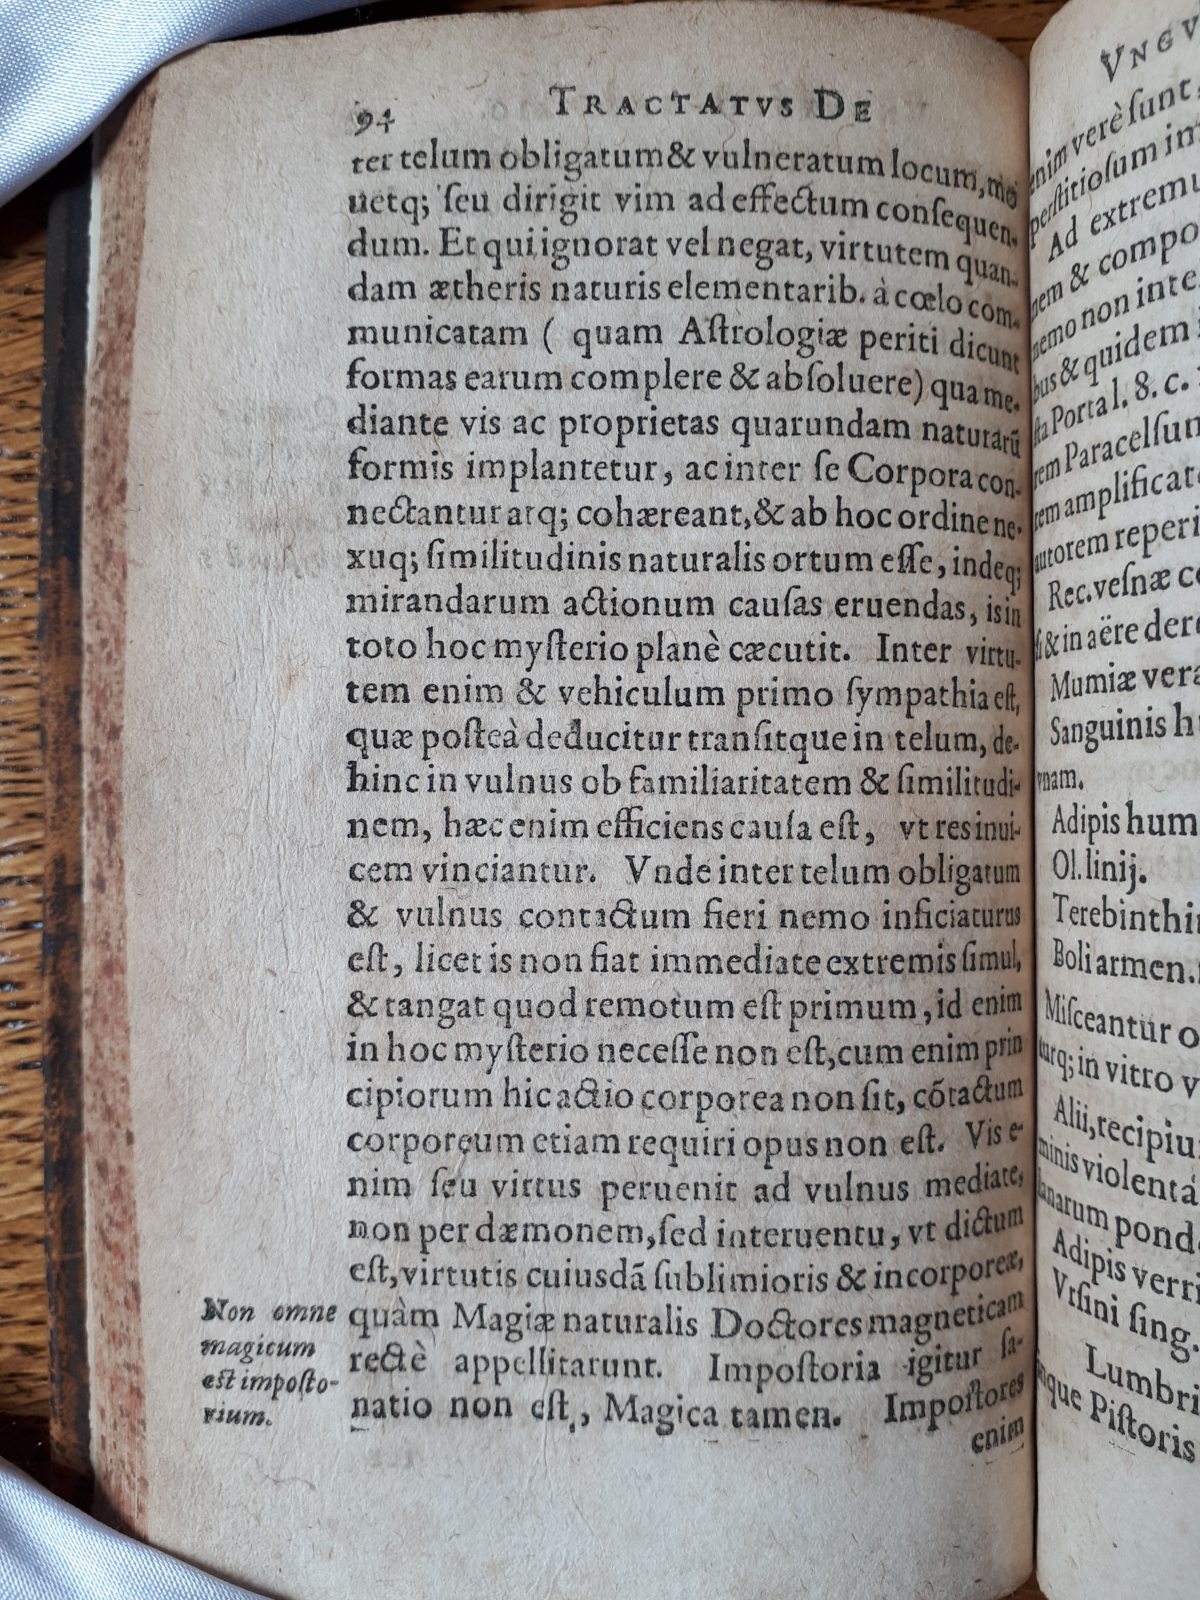 Page 94 in a 17th-century printed book, with a single column of Latin text.